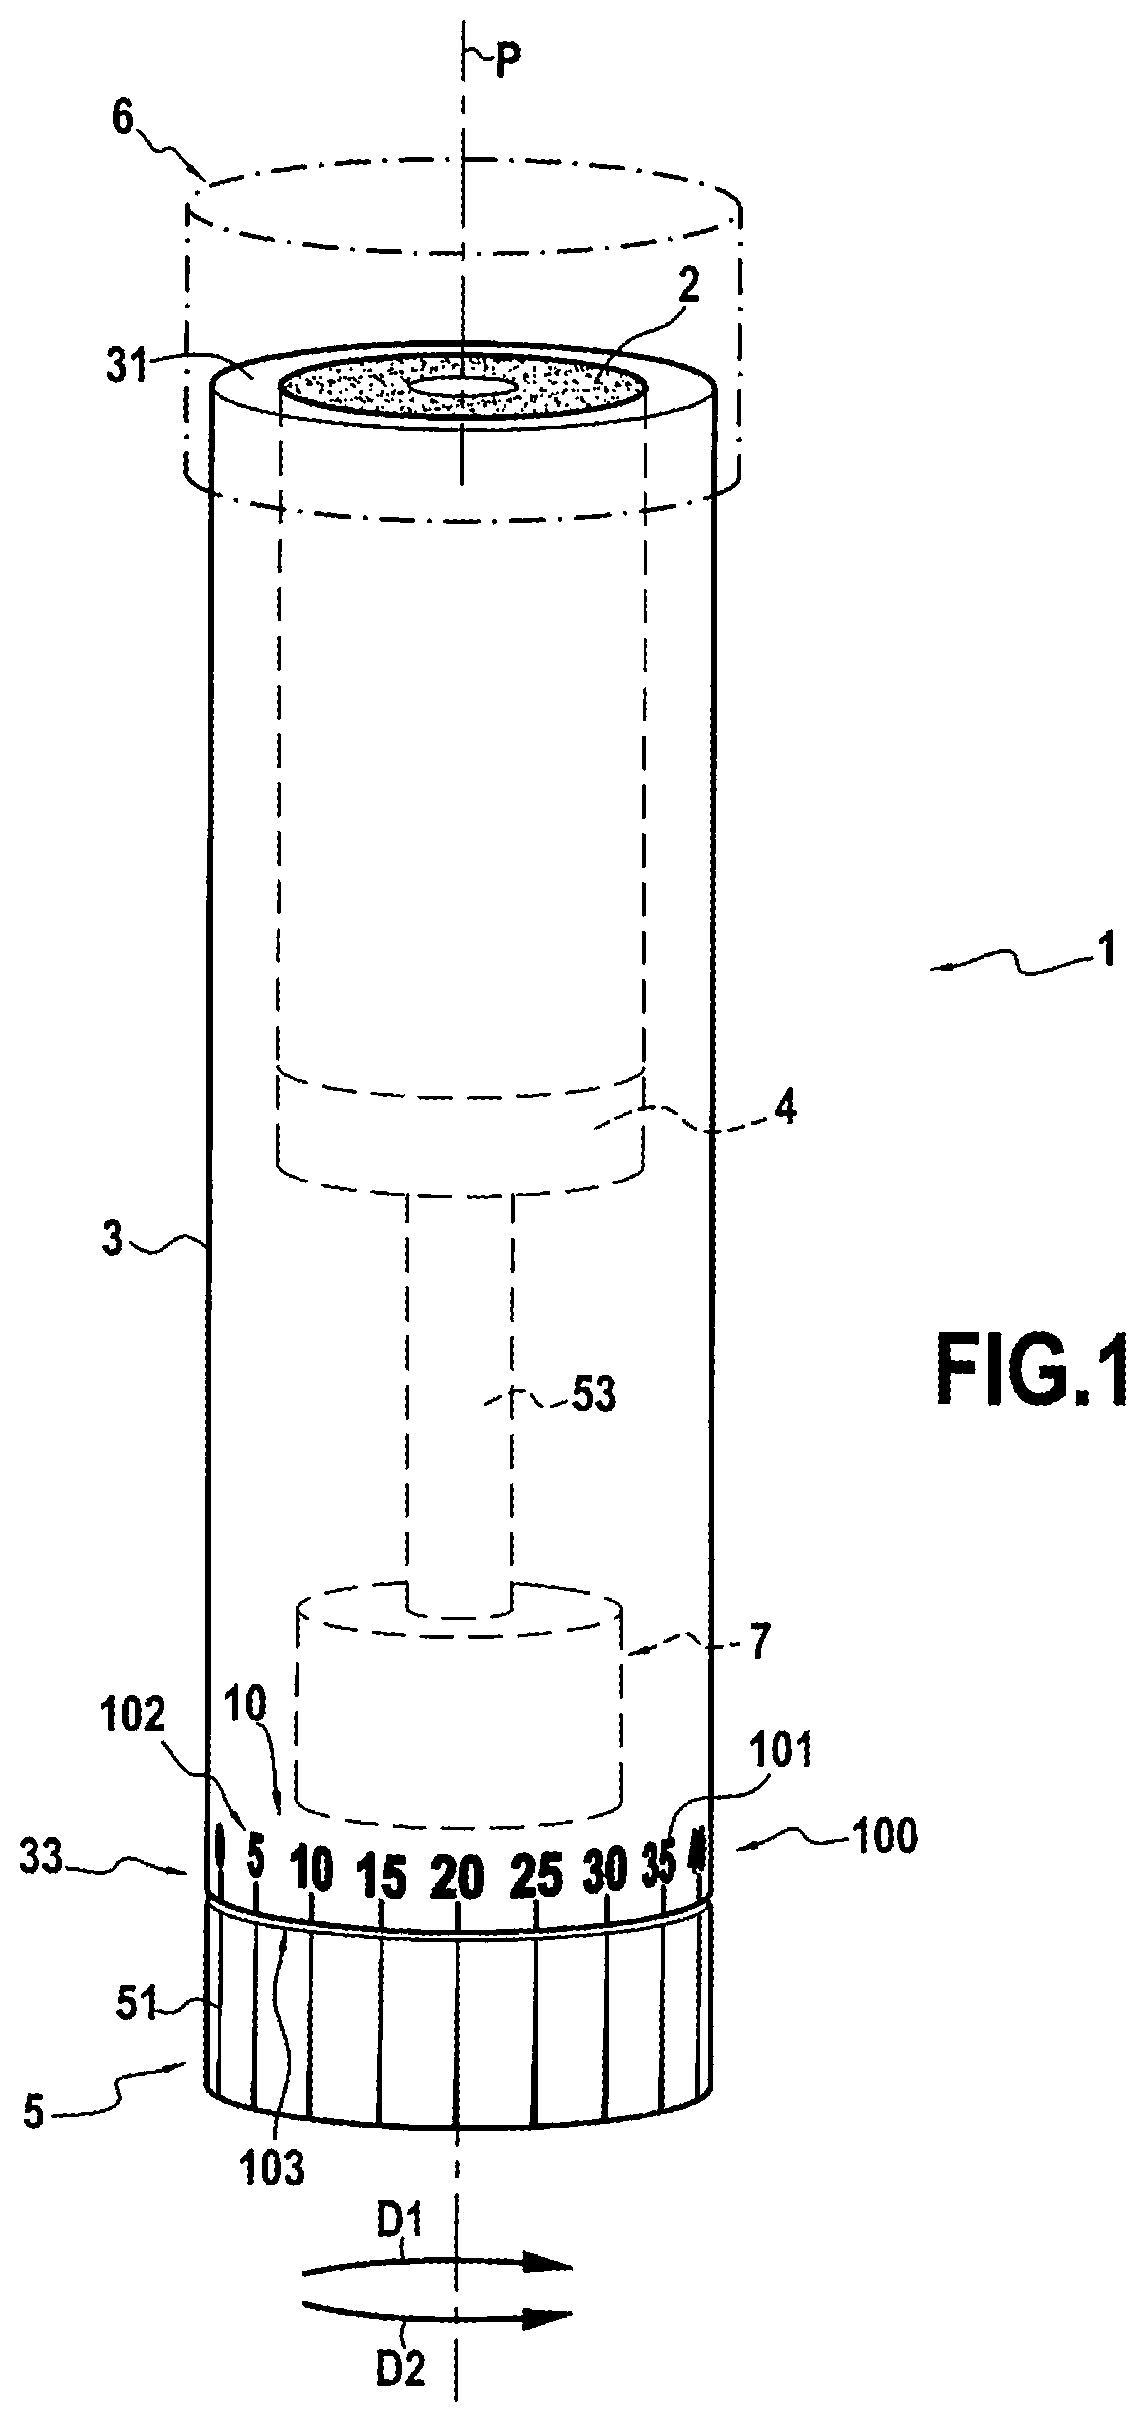 Applicator device with automatic retraction